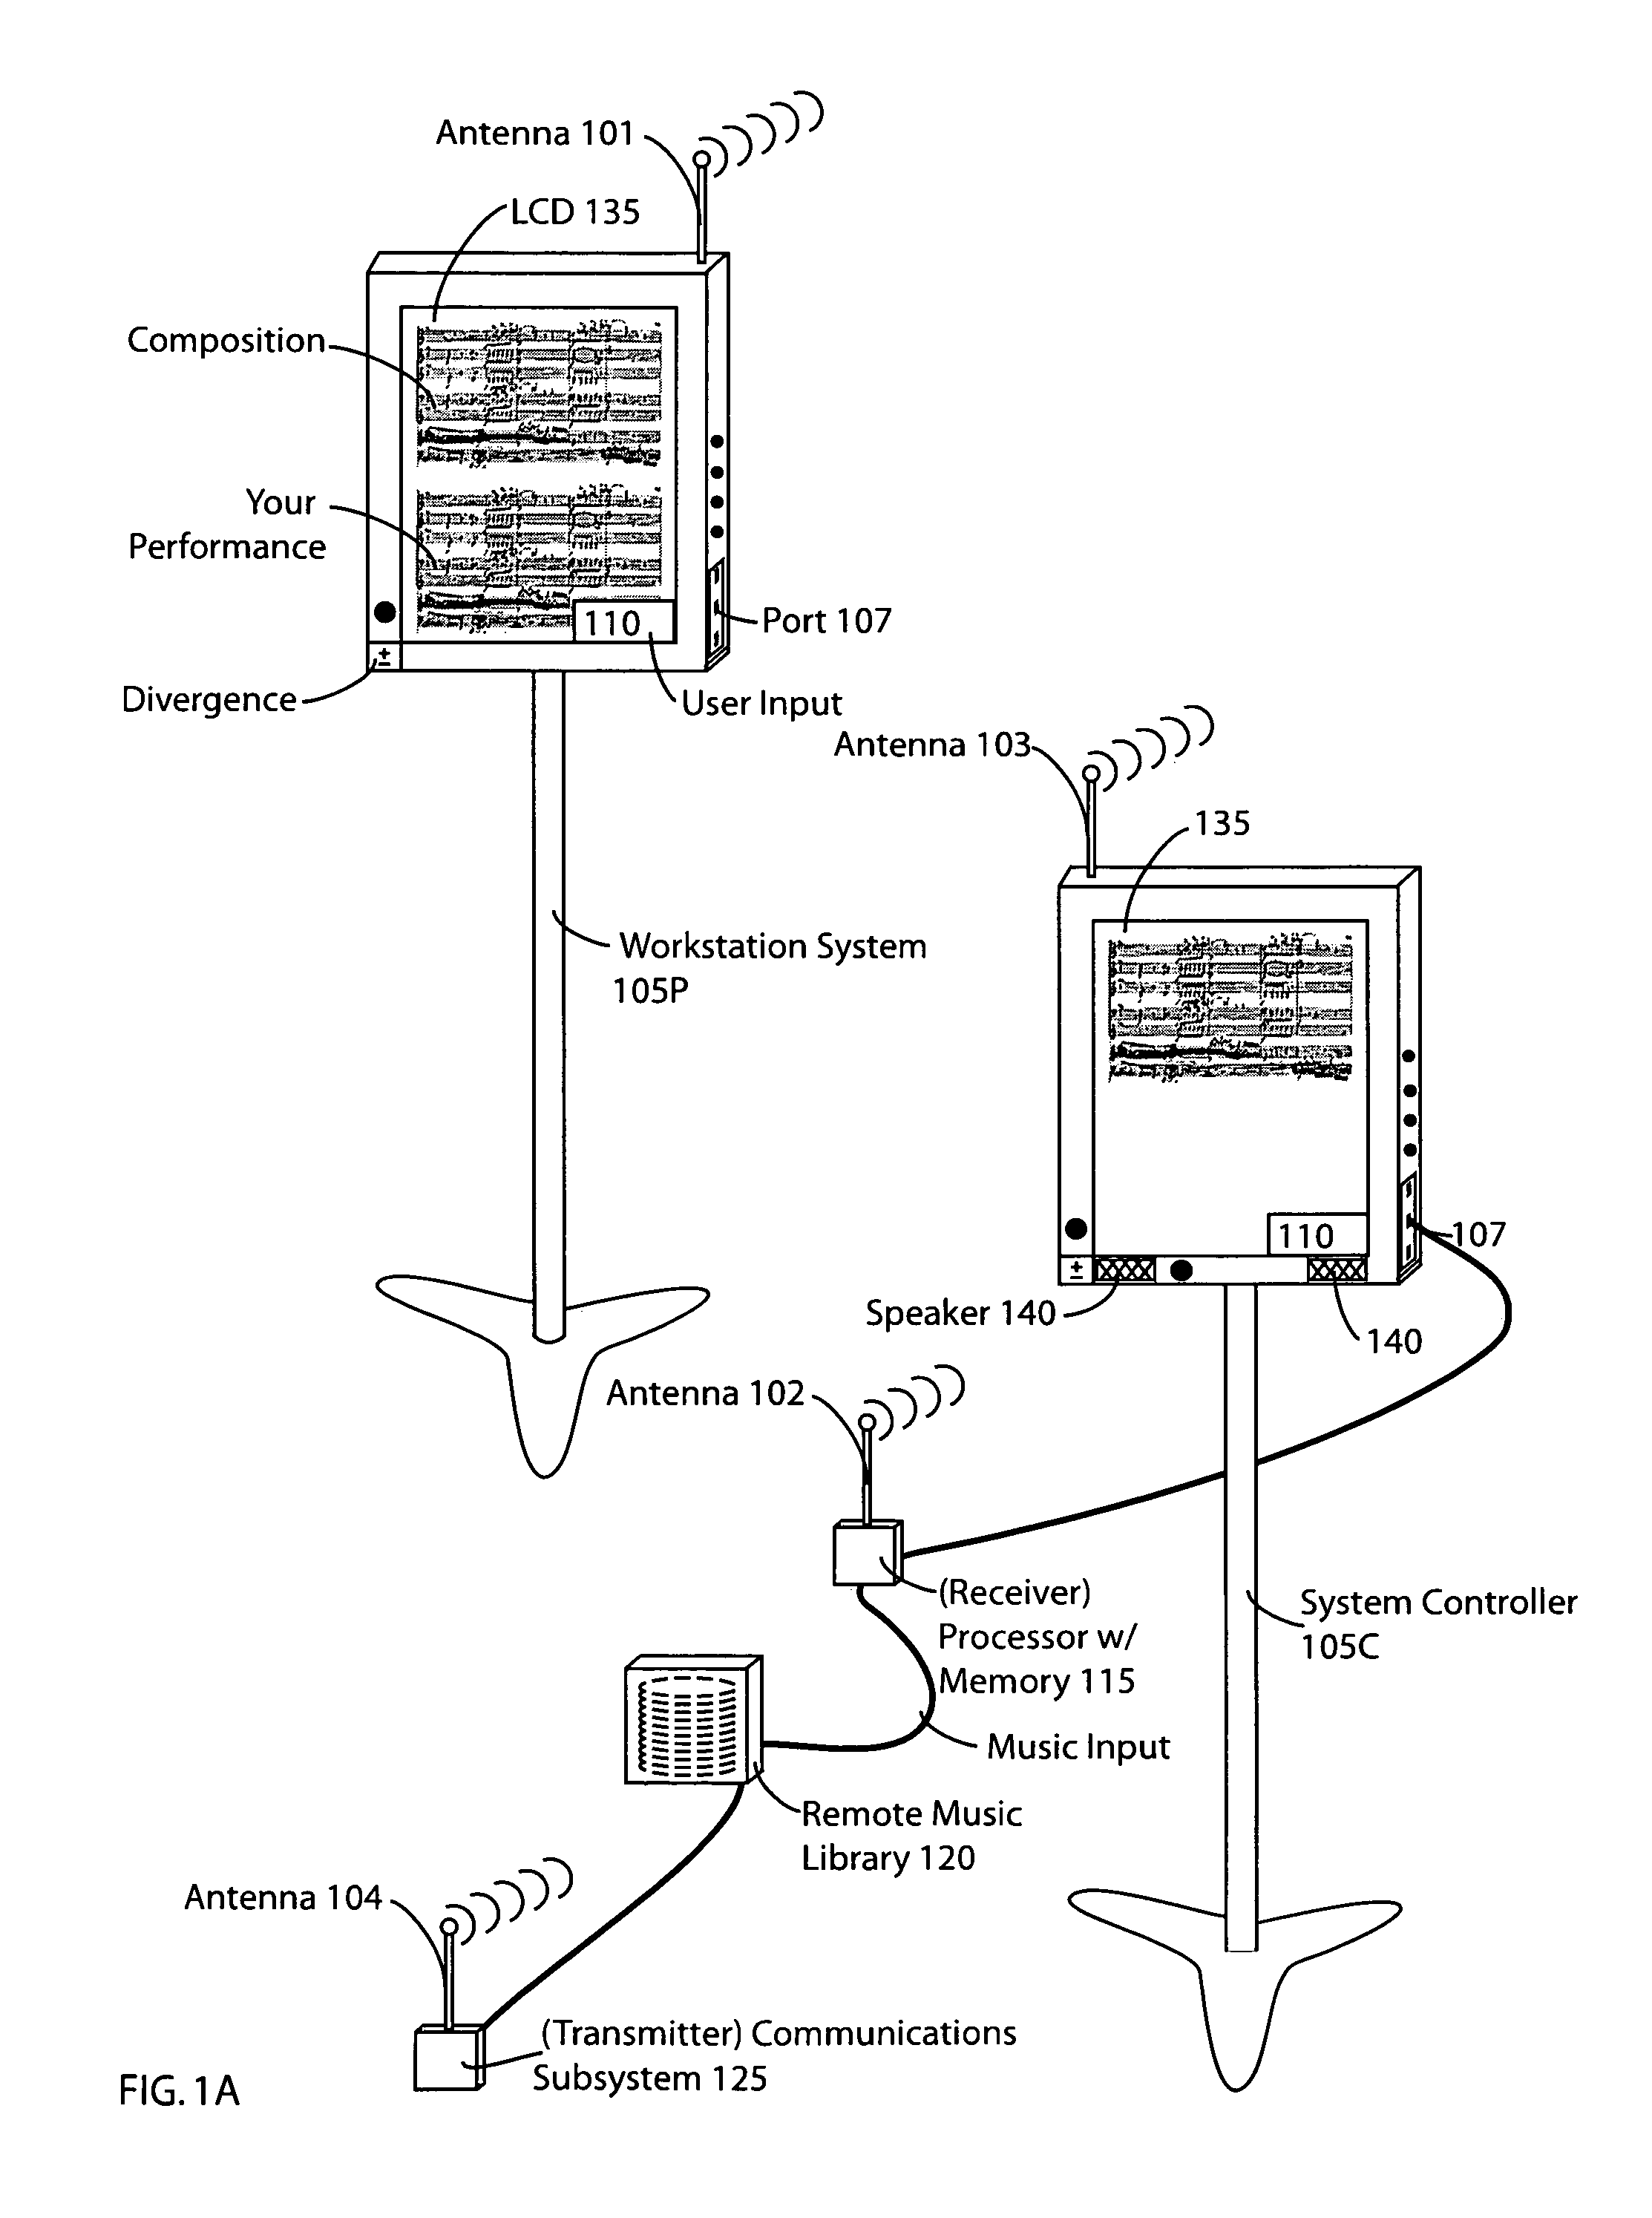 System and methodology for coordinating musical communication and display